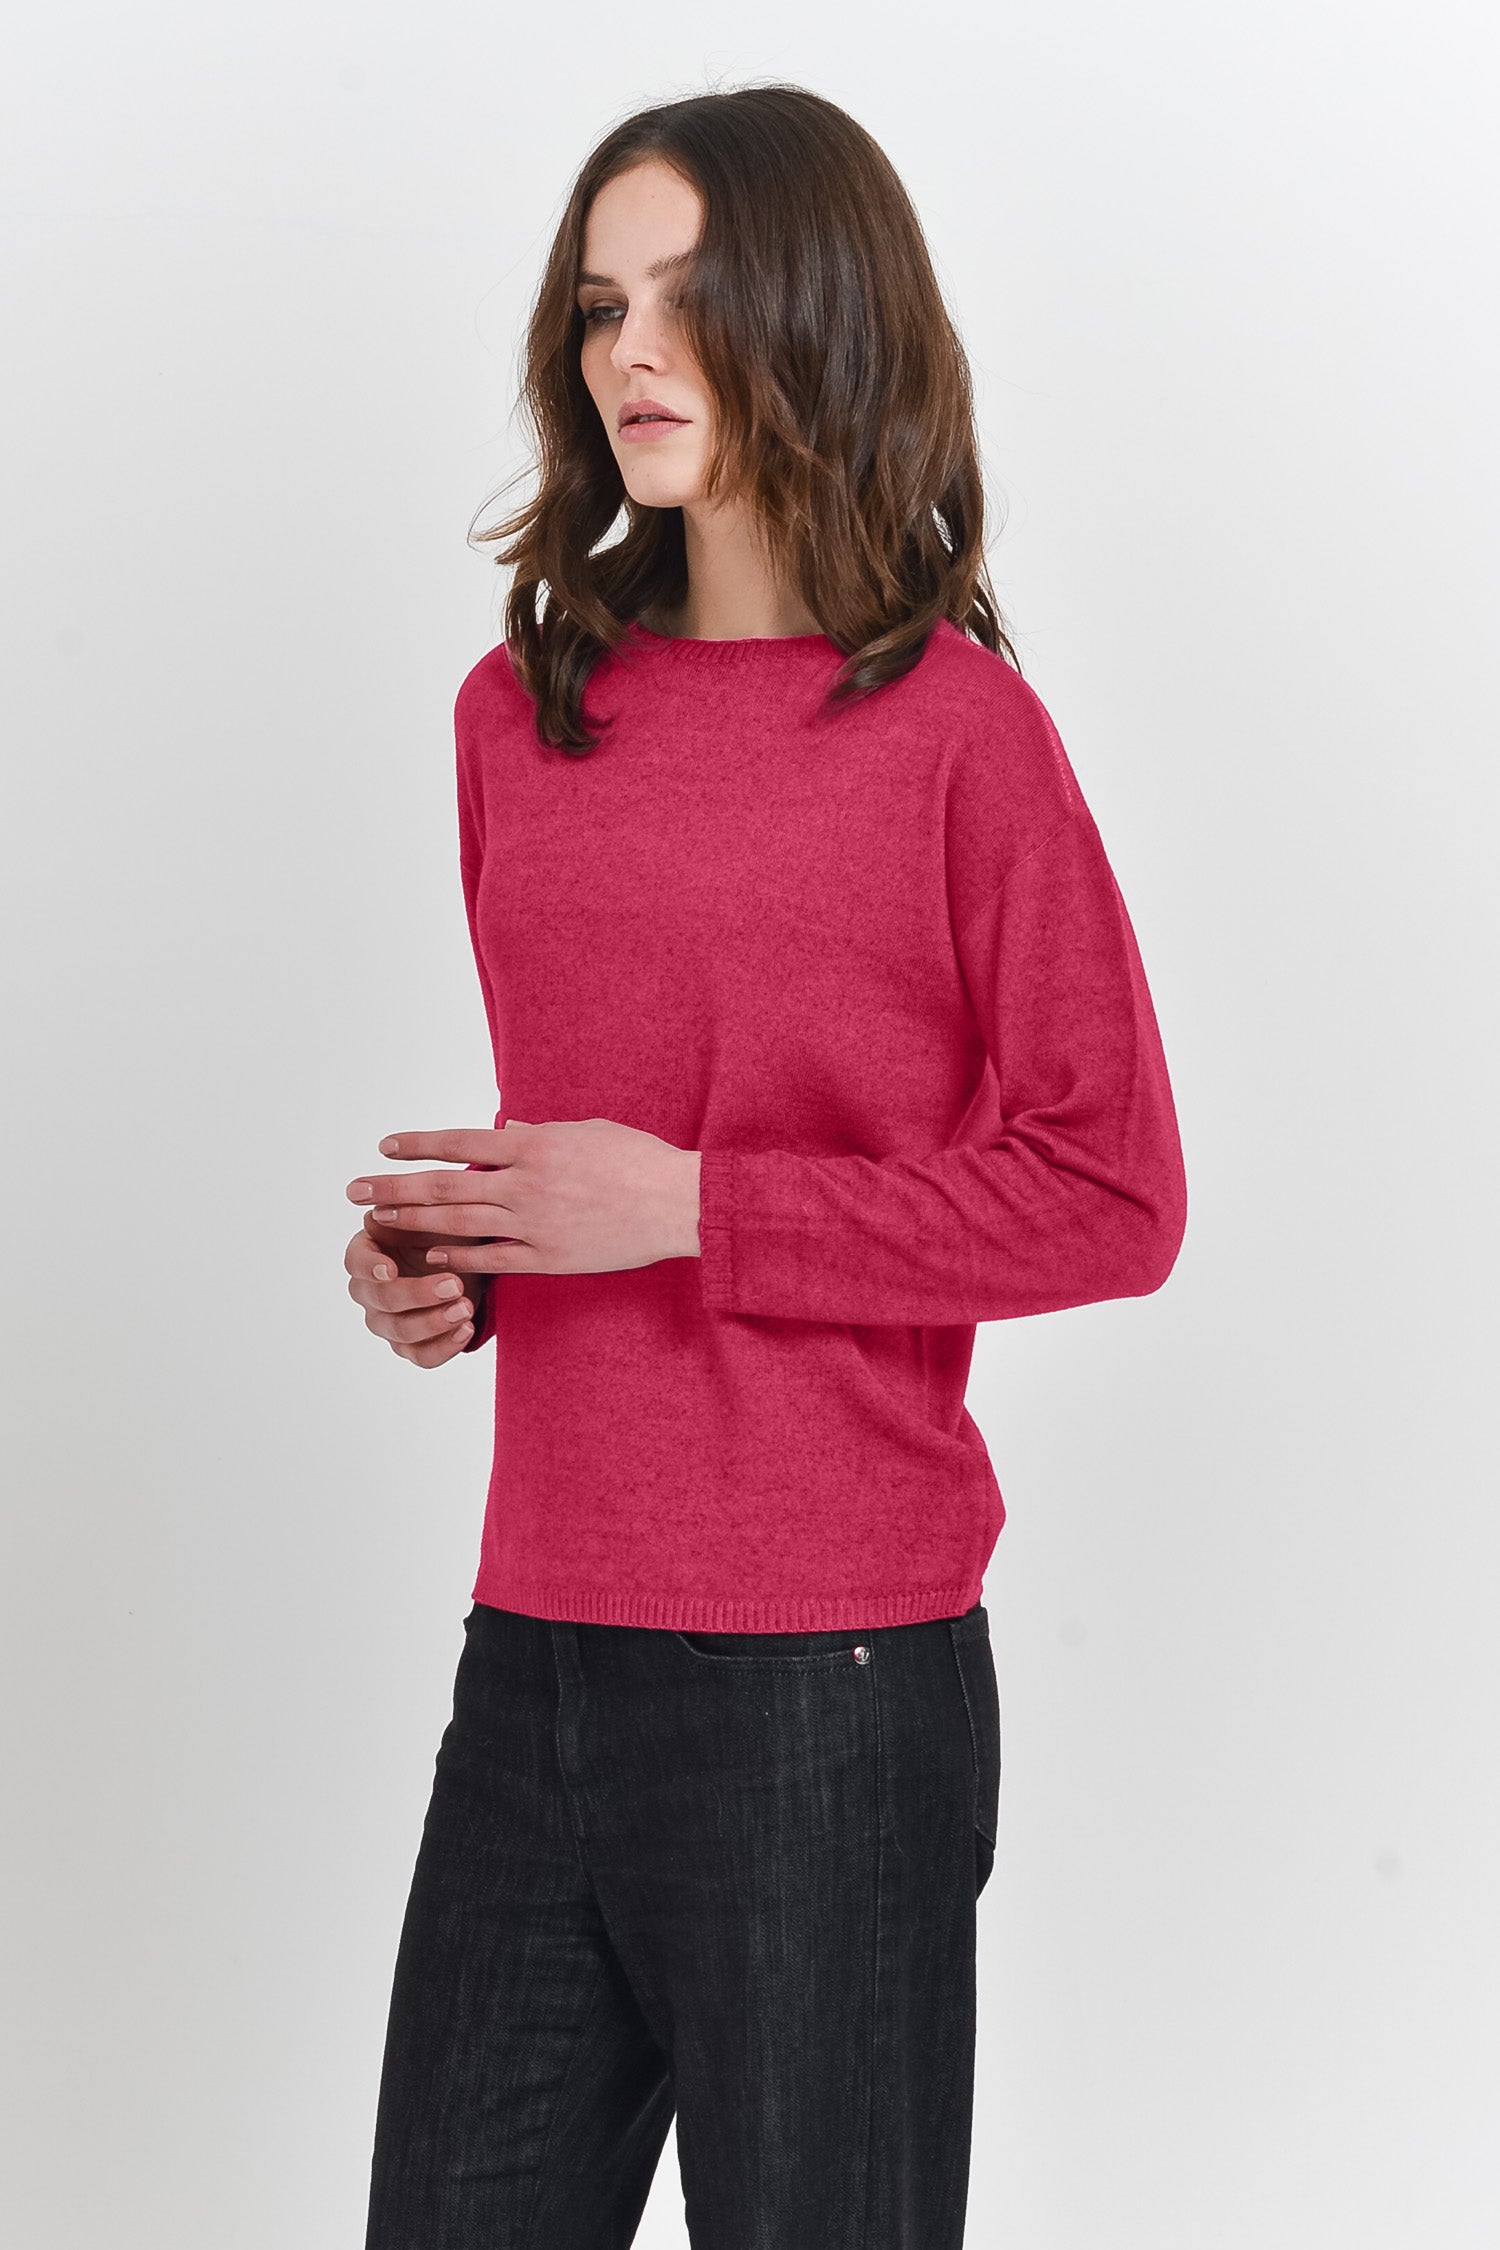 Reay Comfy Sweater - Scarlet